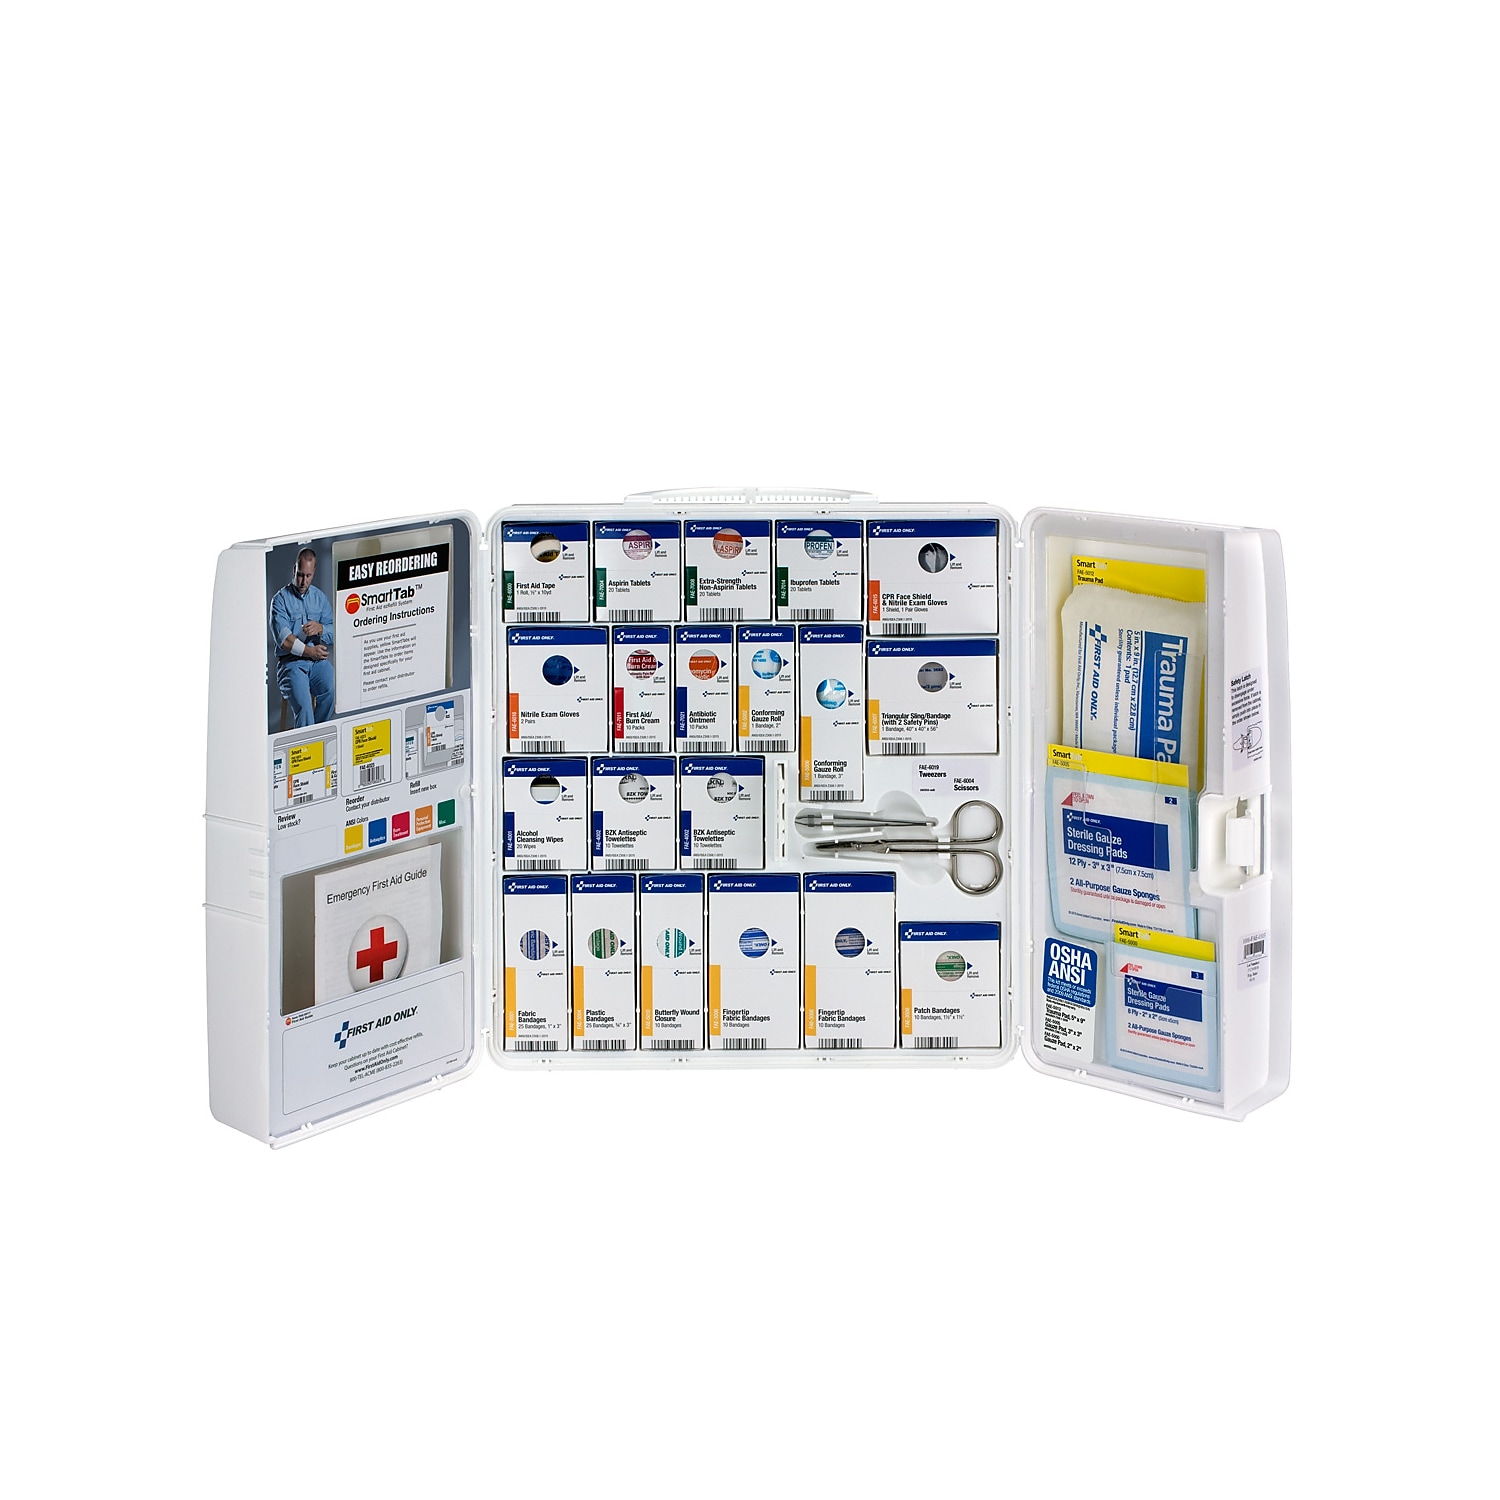 General Business First Aid Kit for 50 People 245 Pieces Plastic Case 1000FAE0103 - image 2 of 4